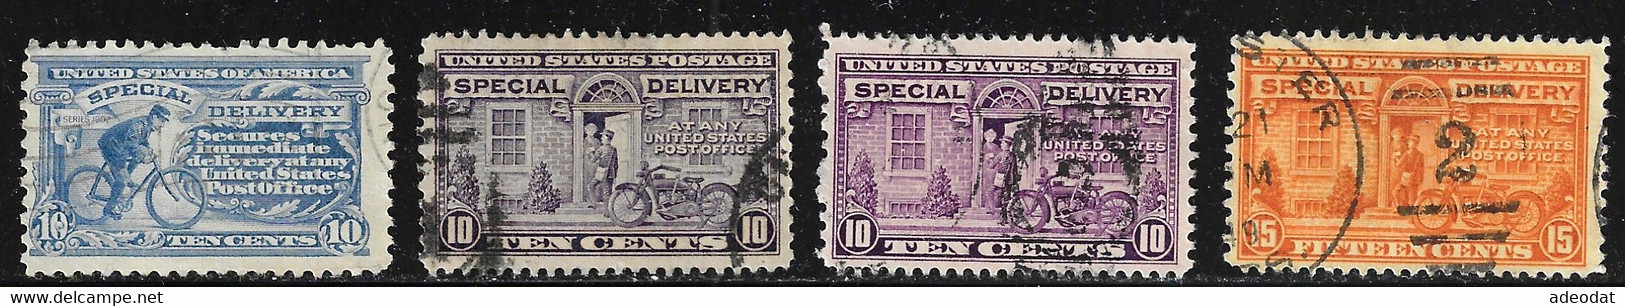 UNITED STATES 1902 SPECIAL DELIVERY SCOTT E8,E12,E13,E15 B USED - Special Delivery, Registration & Certified